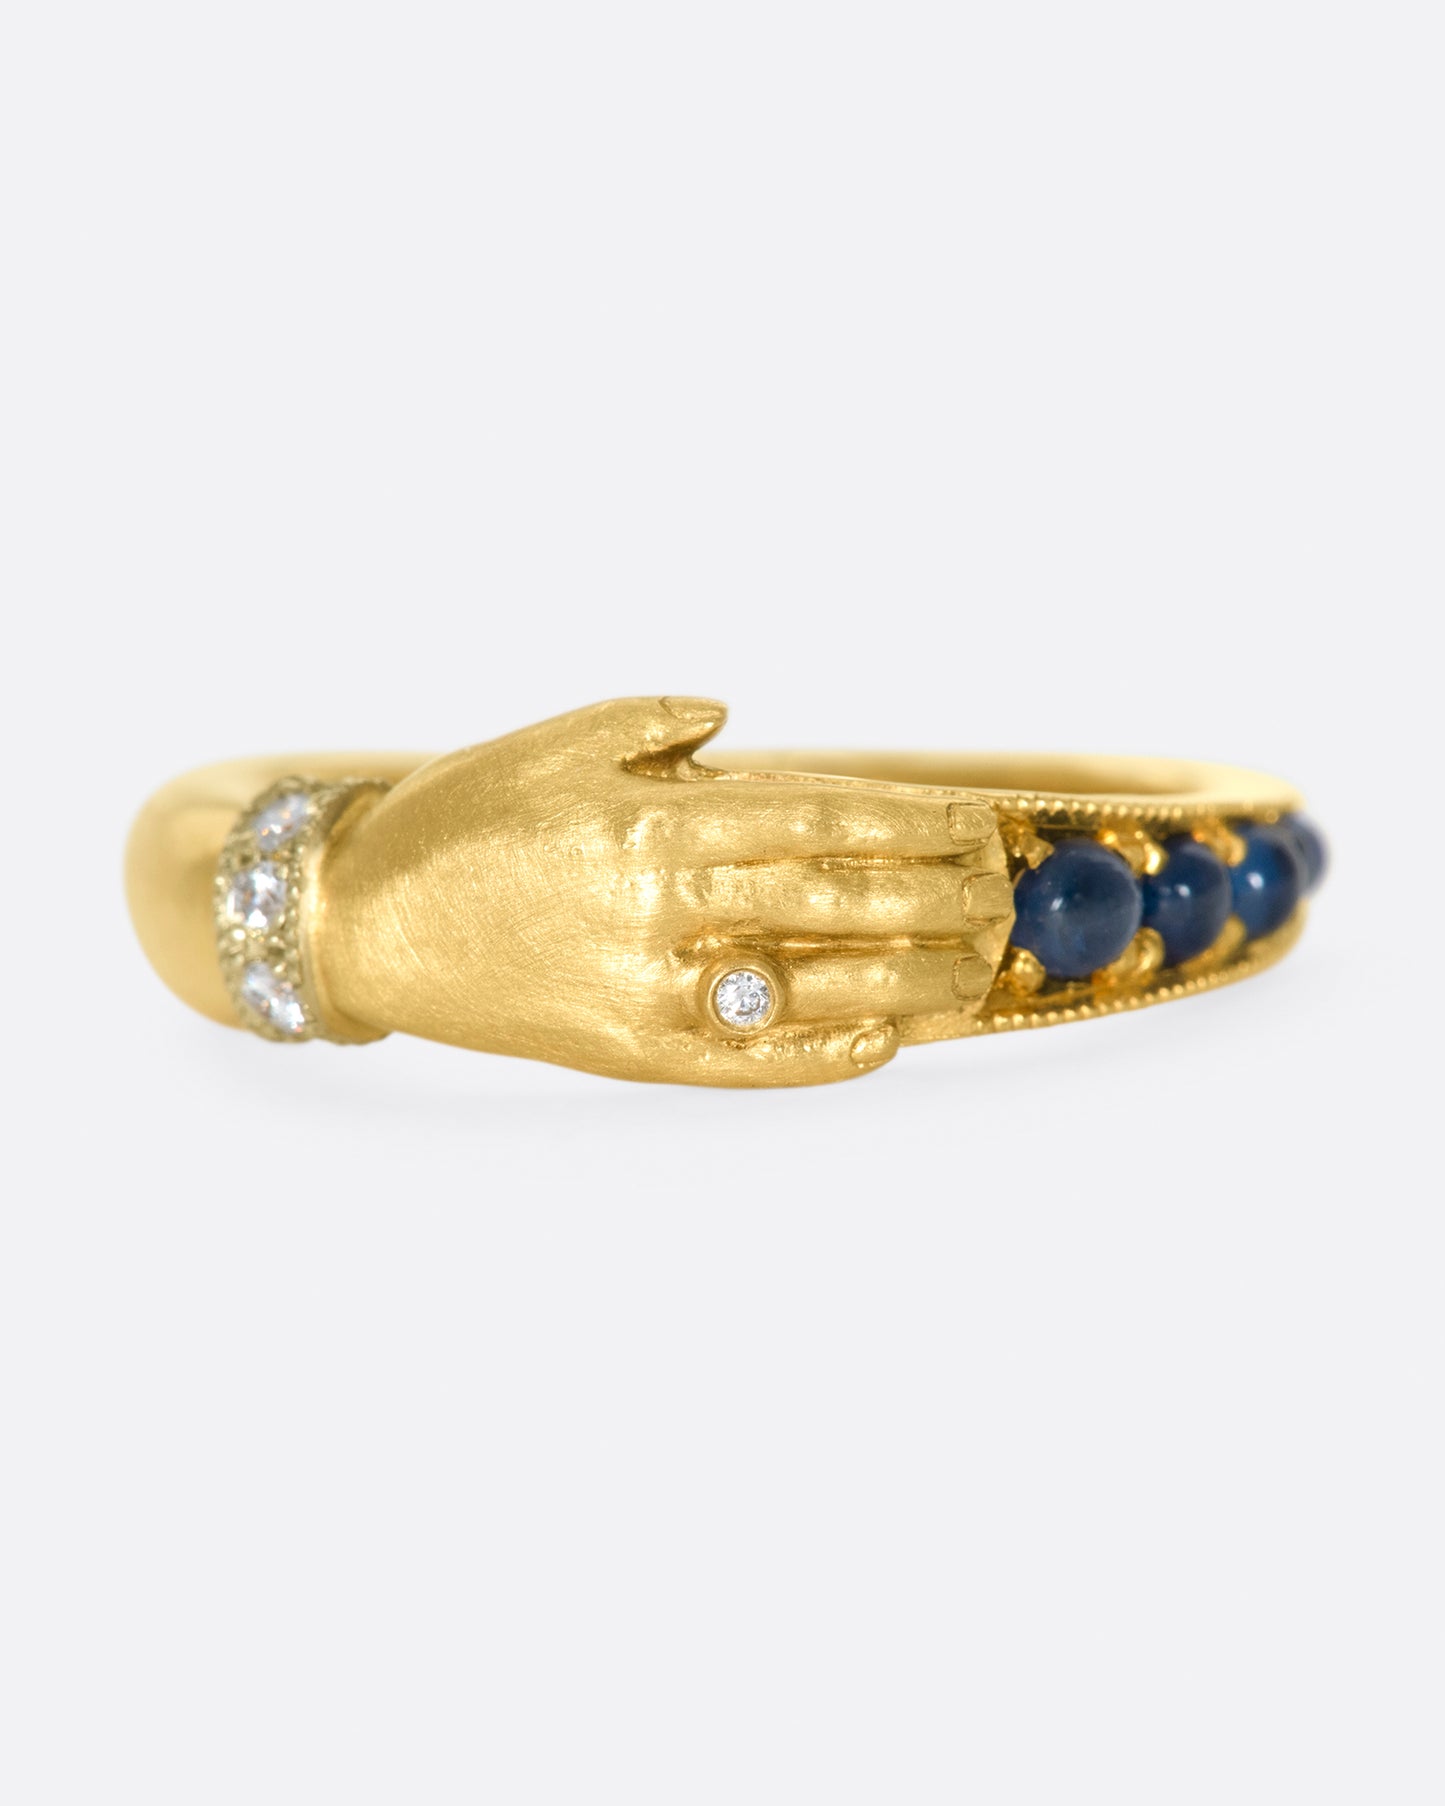 The design of this ring is driven by a combination of Anthony Lent's fascinations with ancient jewelry and the world of the miniature.